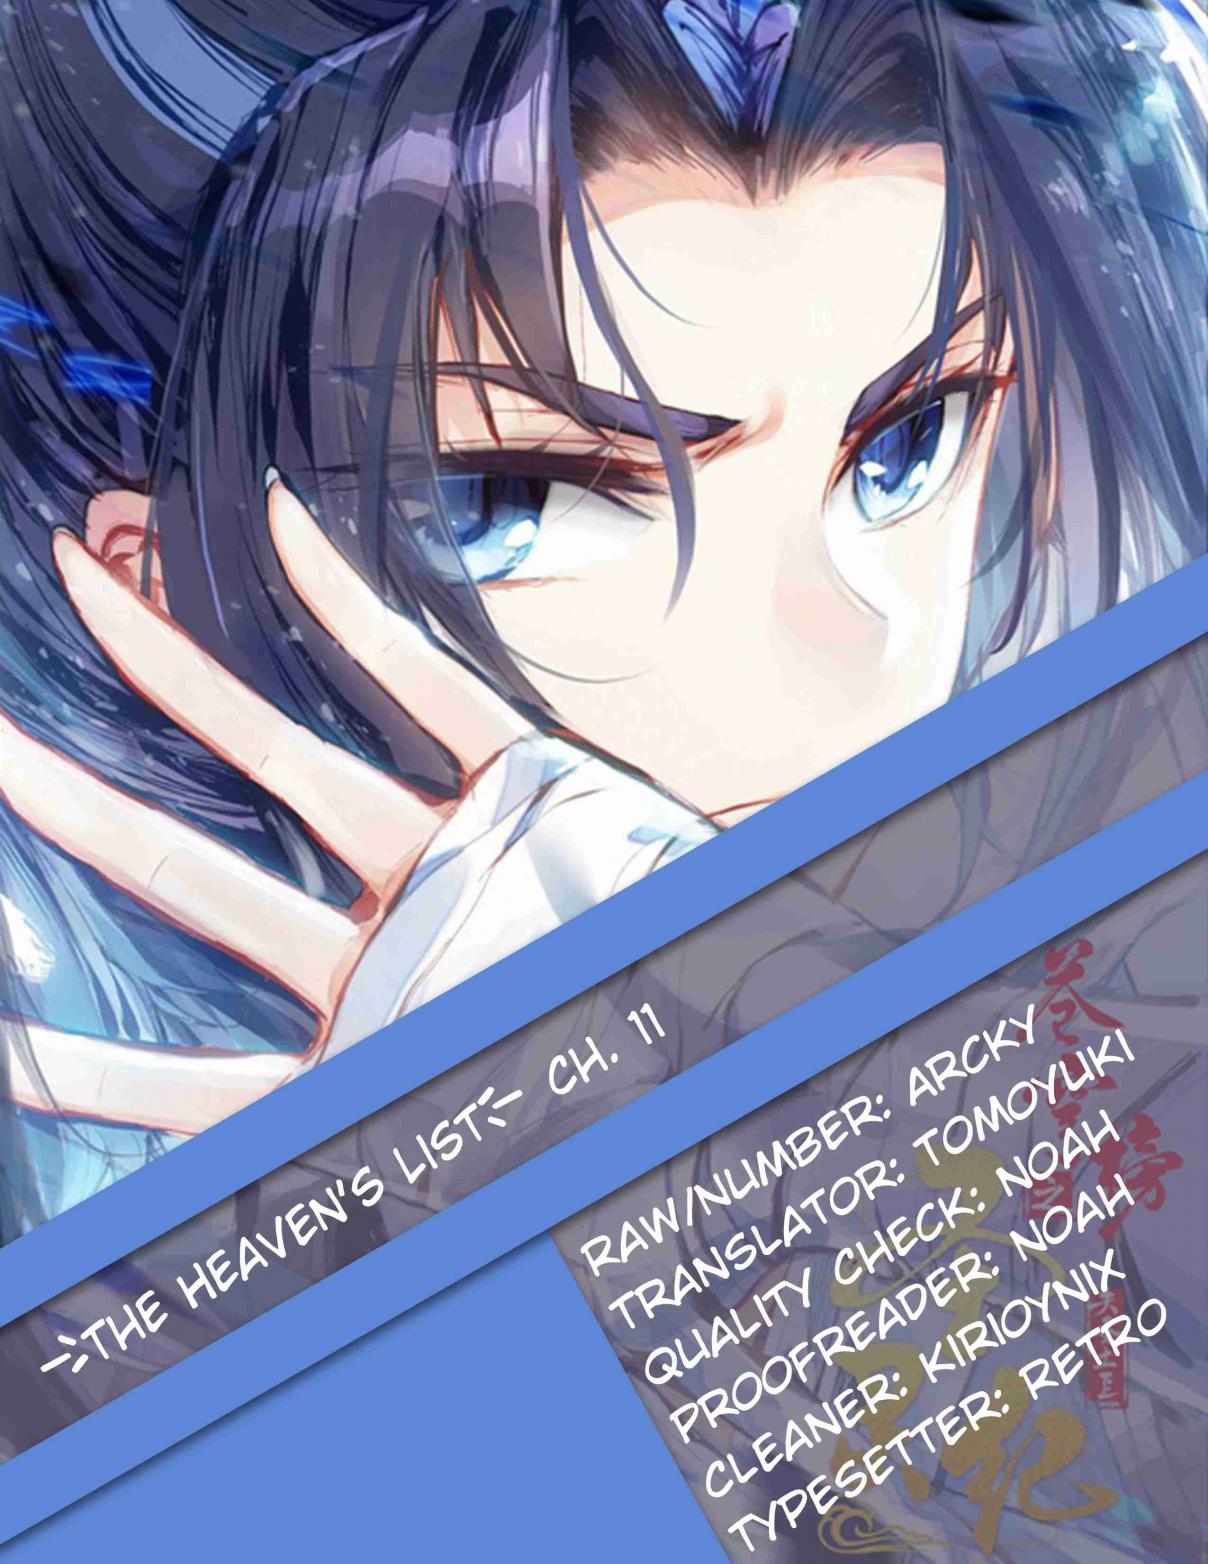 The Heaven's List Ch. 11 Breaking through on the spot (part 1)